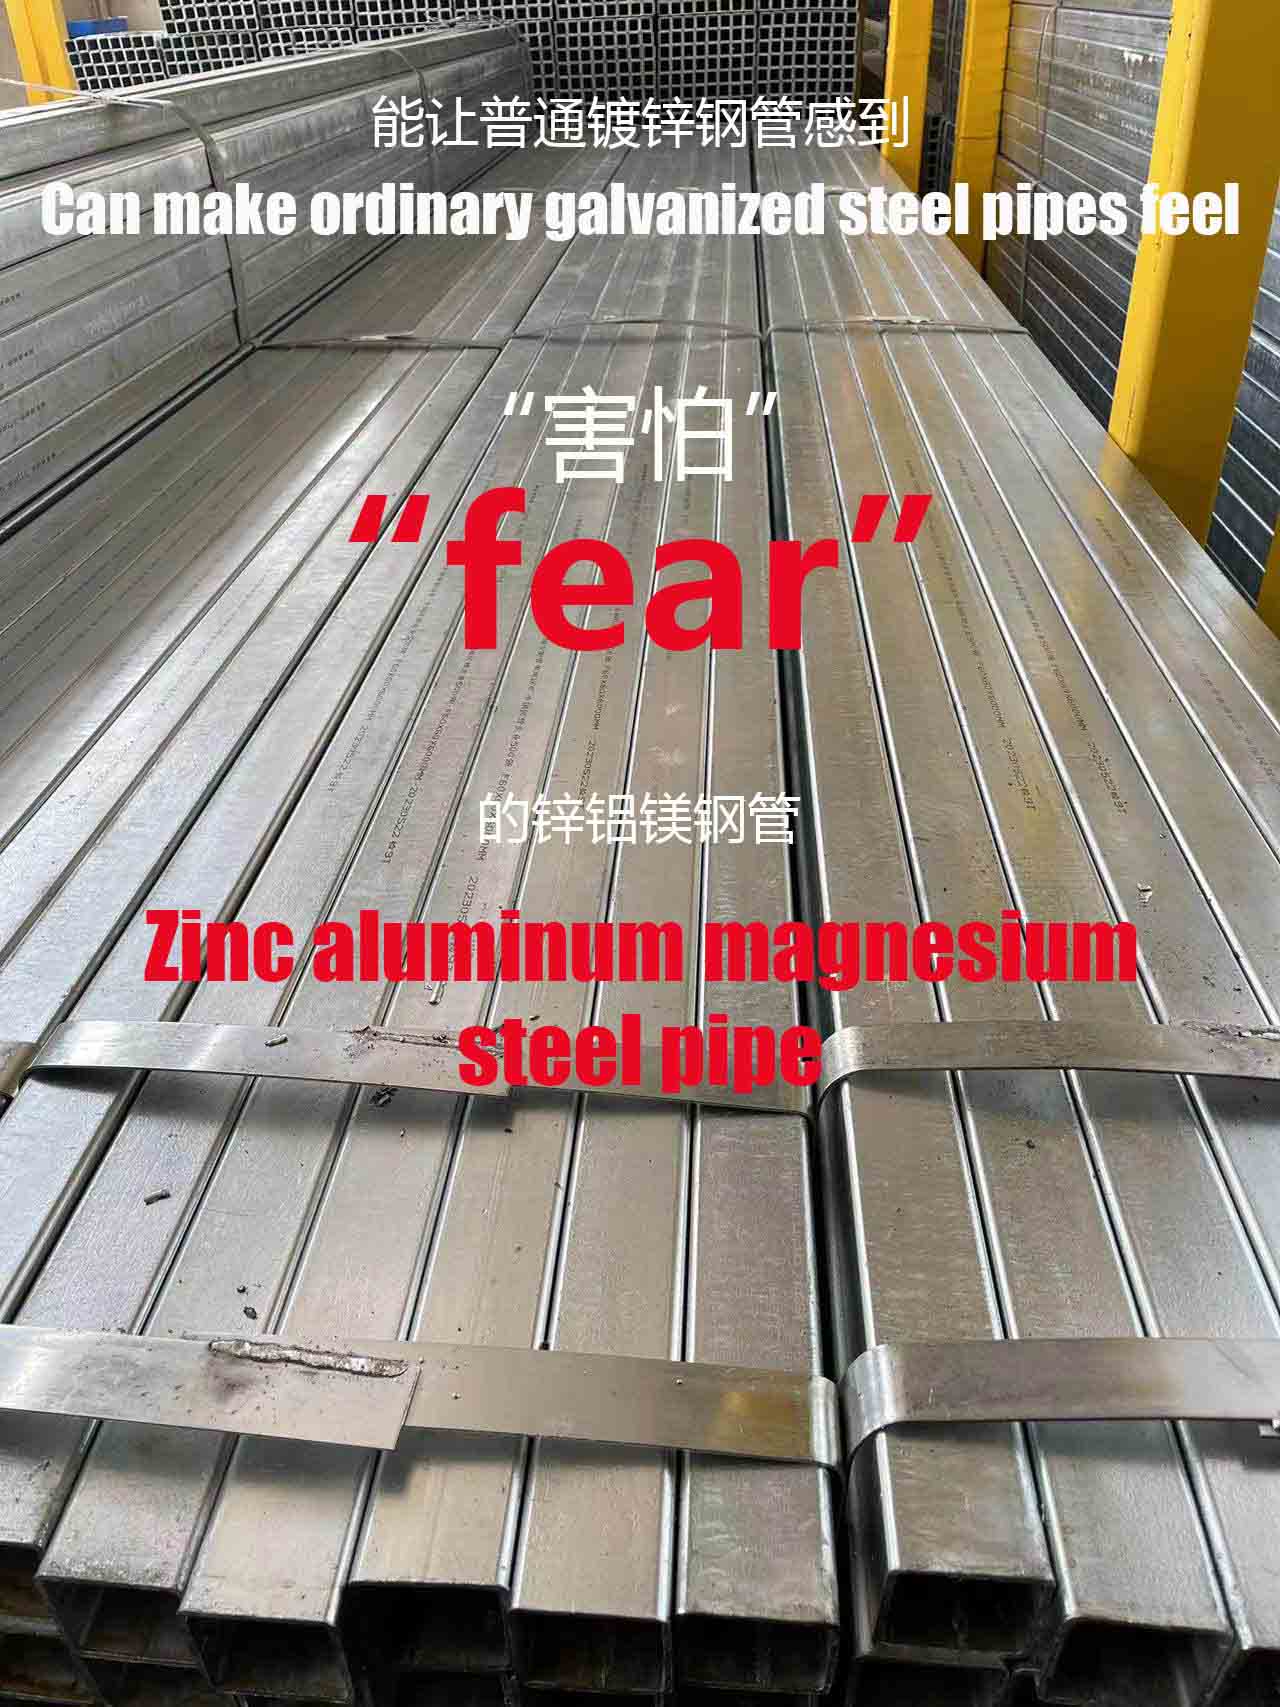 Zinc aluminum magnesium steel pipes that can make ordinary galvanized steel pipes “fearful”